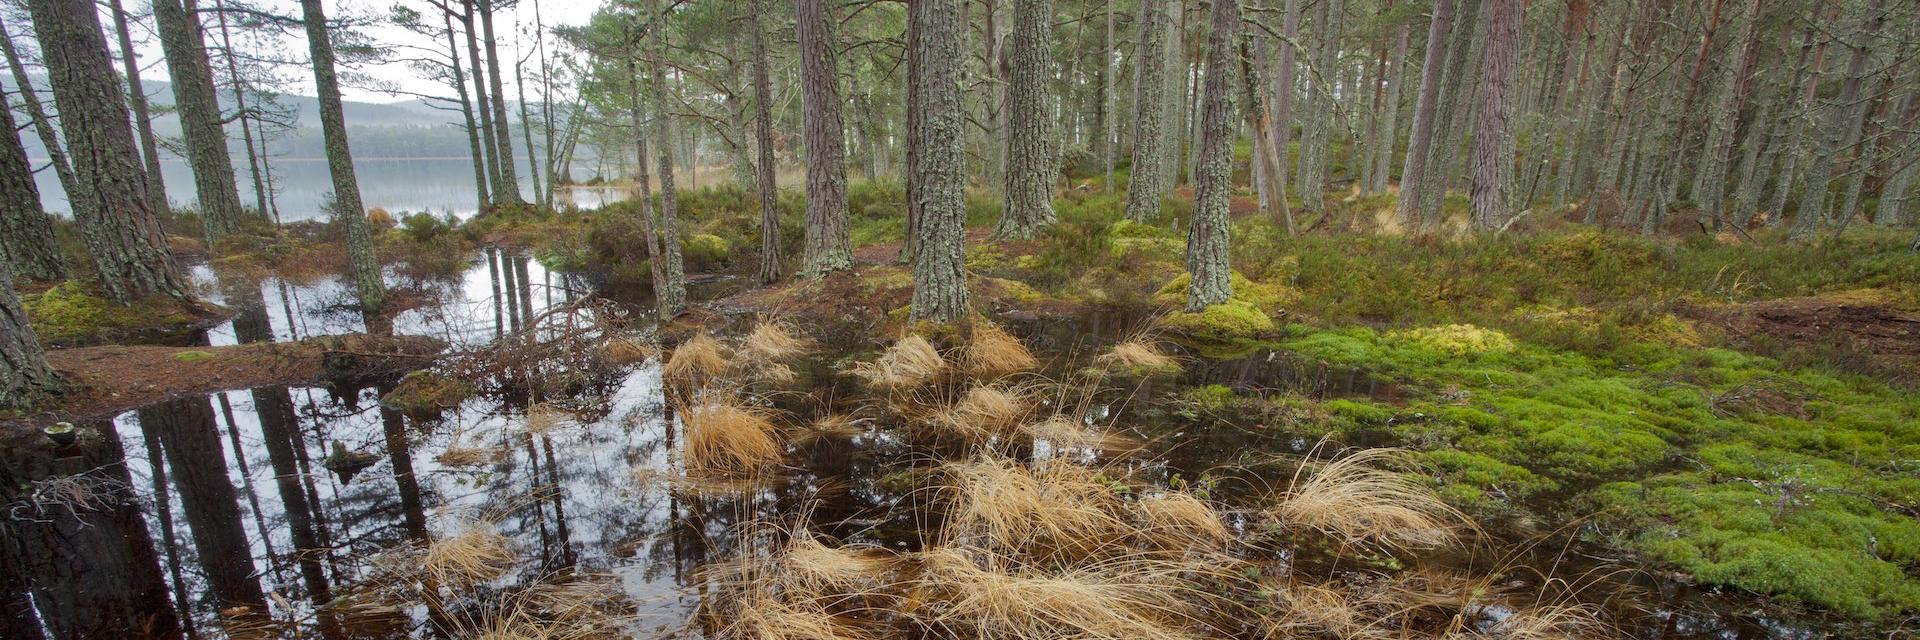 Wetland area of Scots pine in the Abernethy Forest, Cairngorms National Park, Scotland.